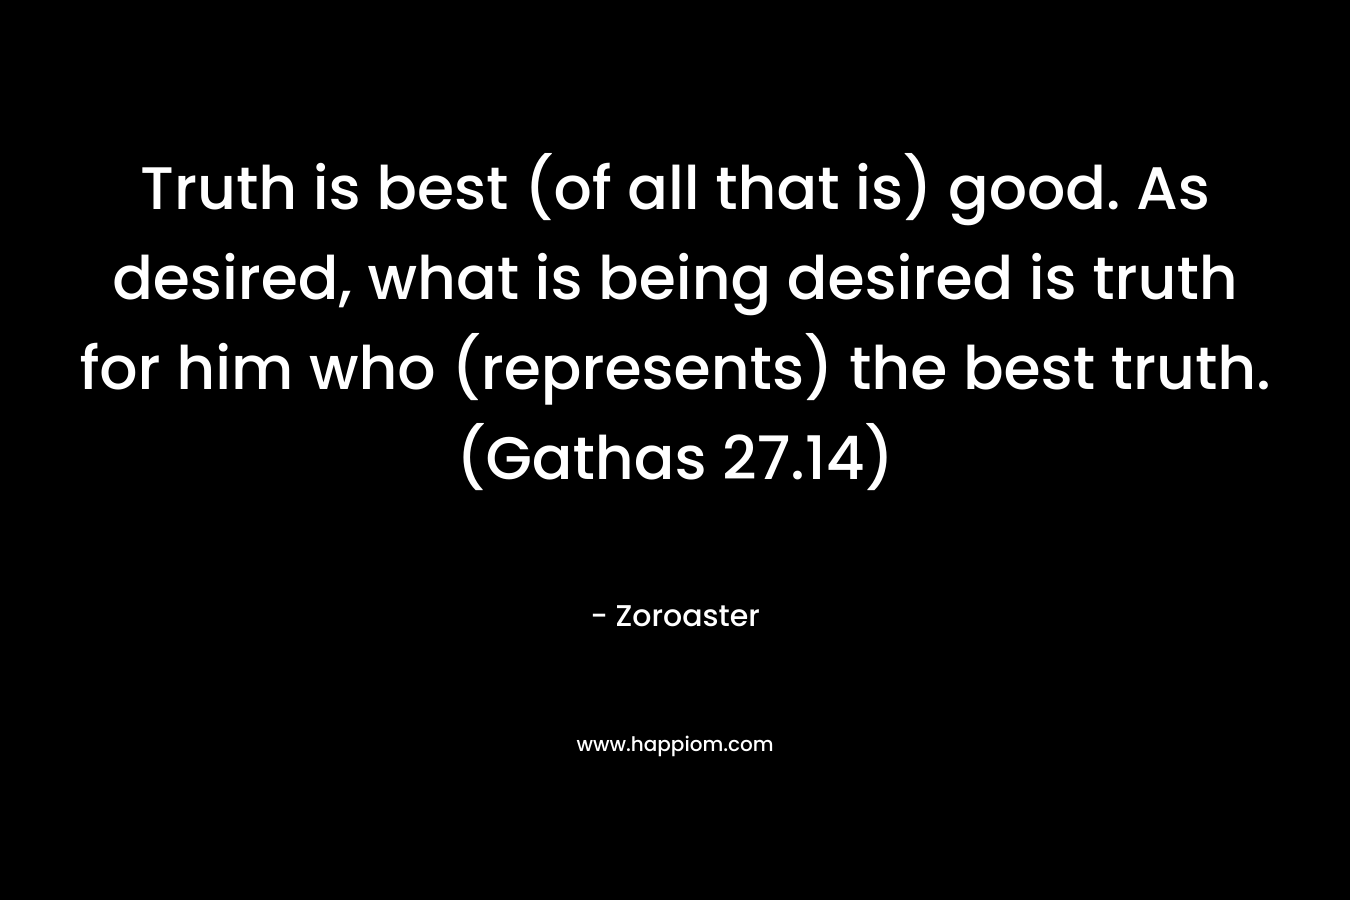 Truth is best (of all that is) good. As desired, what is being desired is truth for him who (represents) the best truth. (Gathas 27.14)